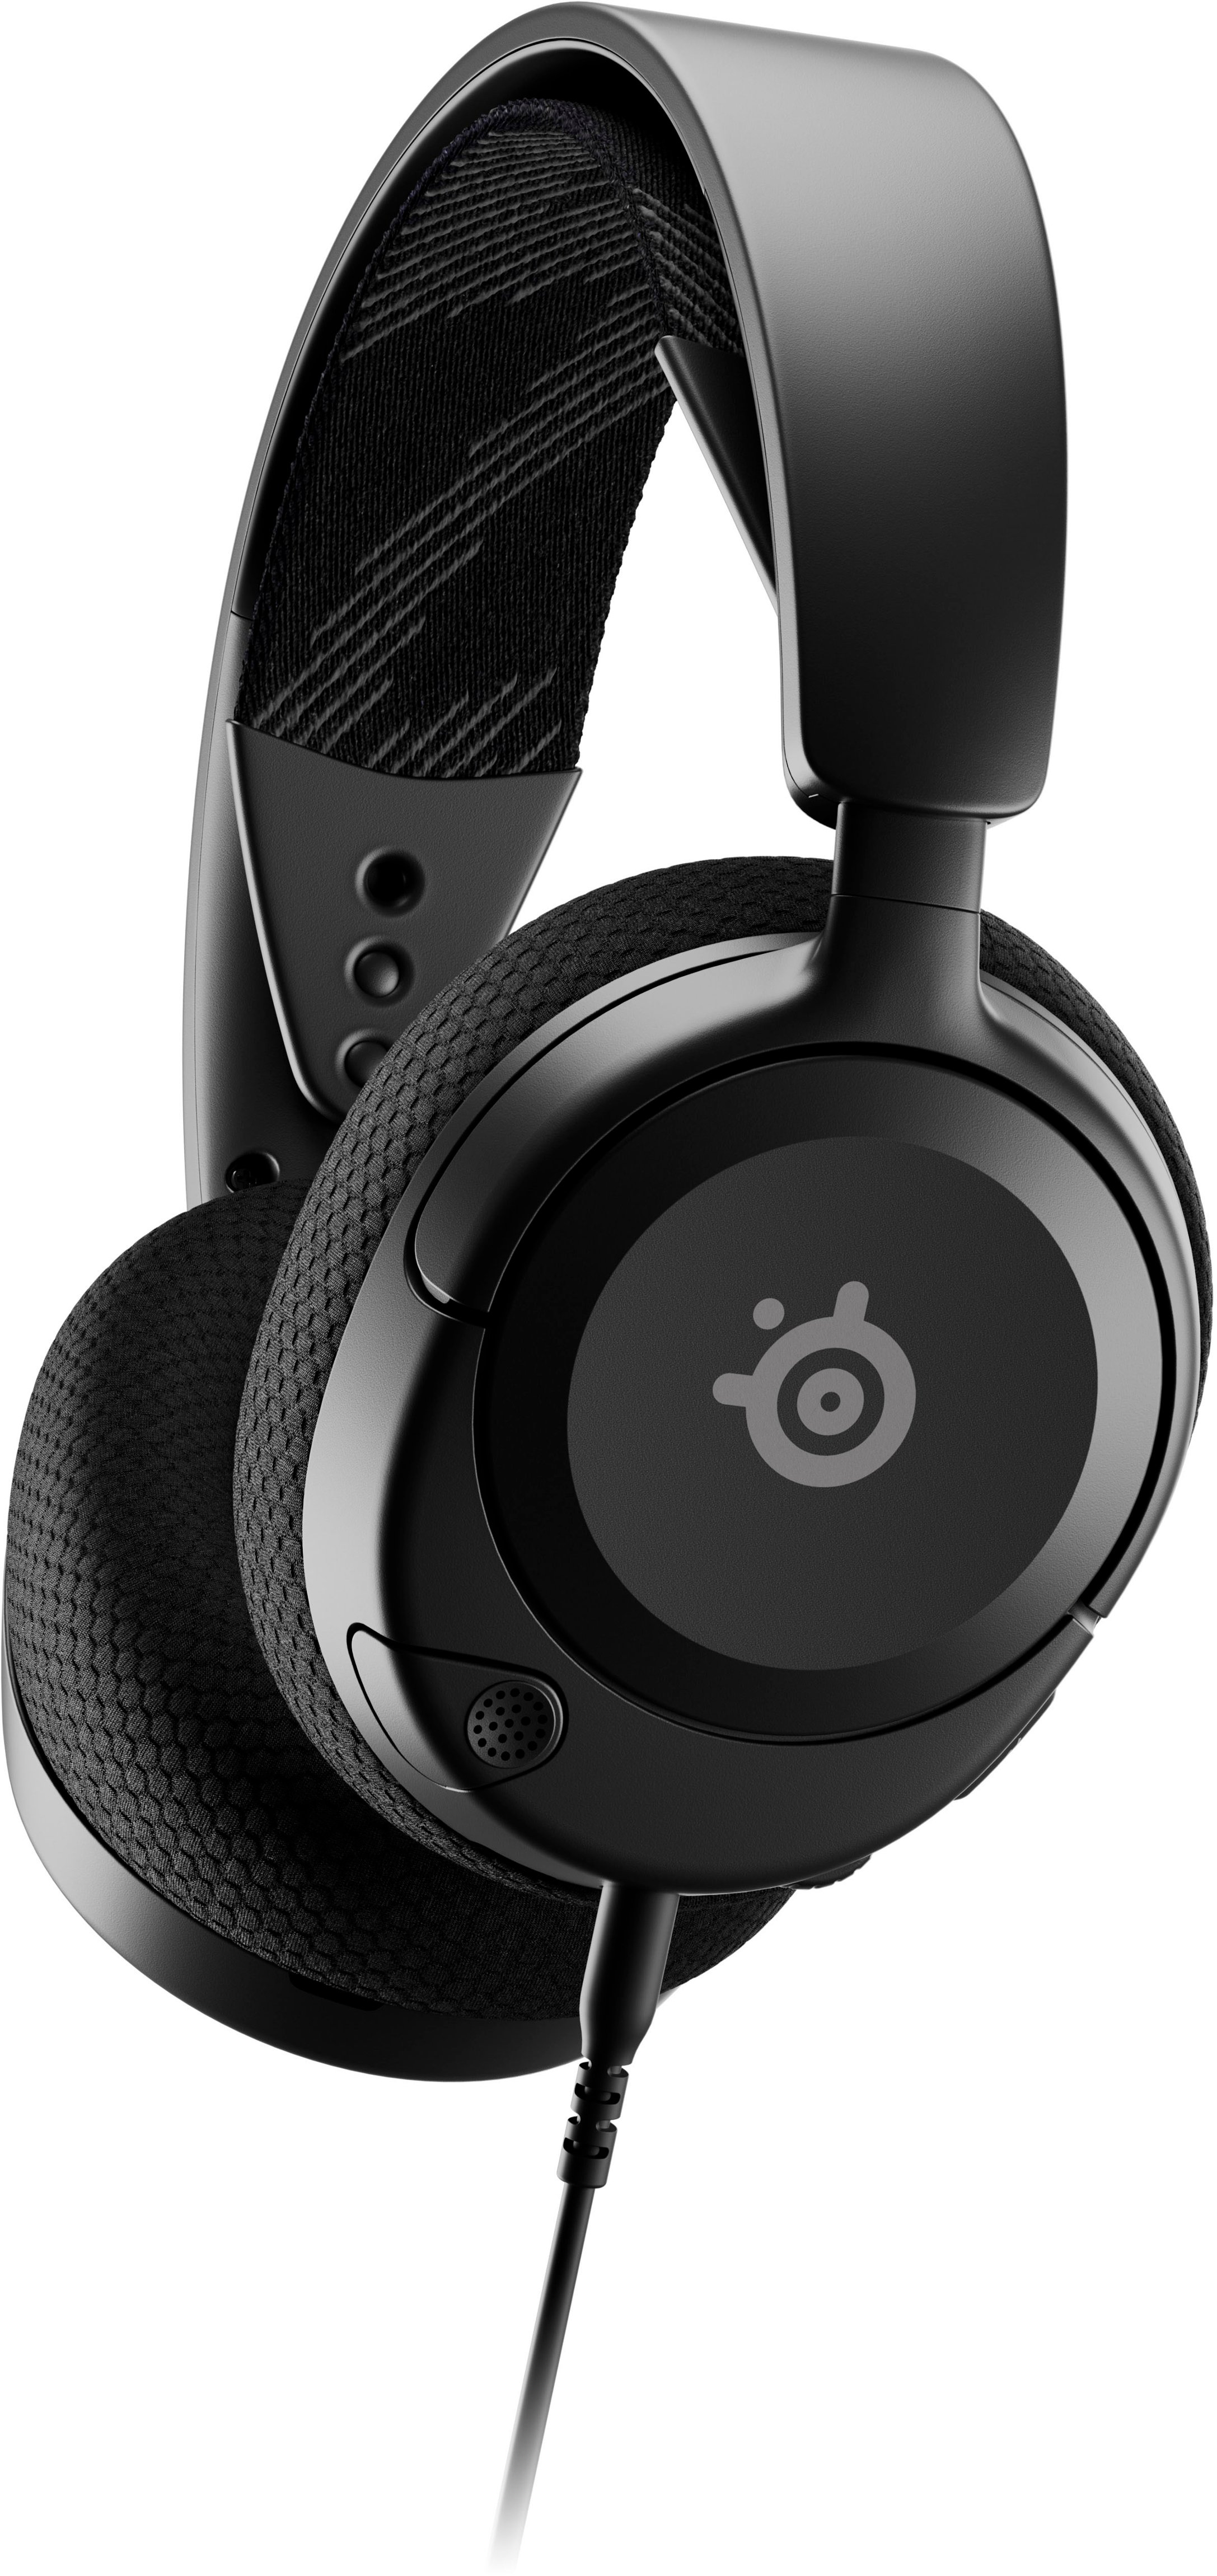 Steelseries Arctis 1 wired gaming headset review